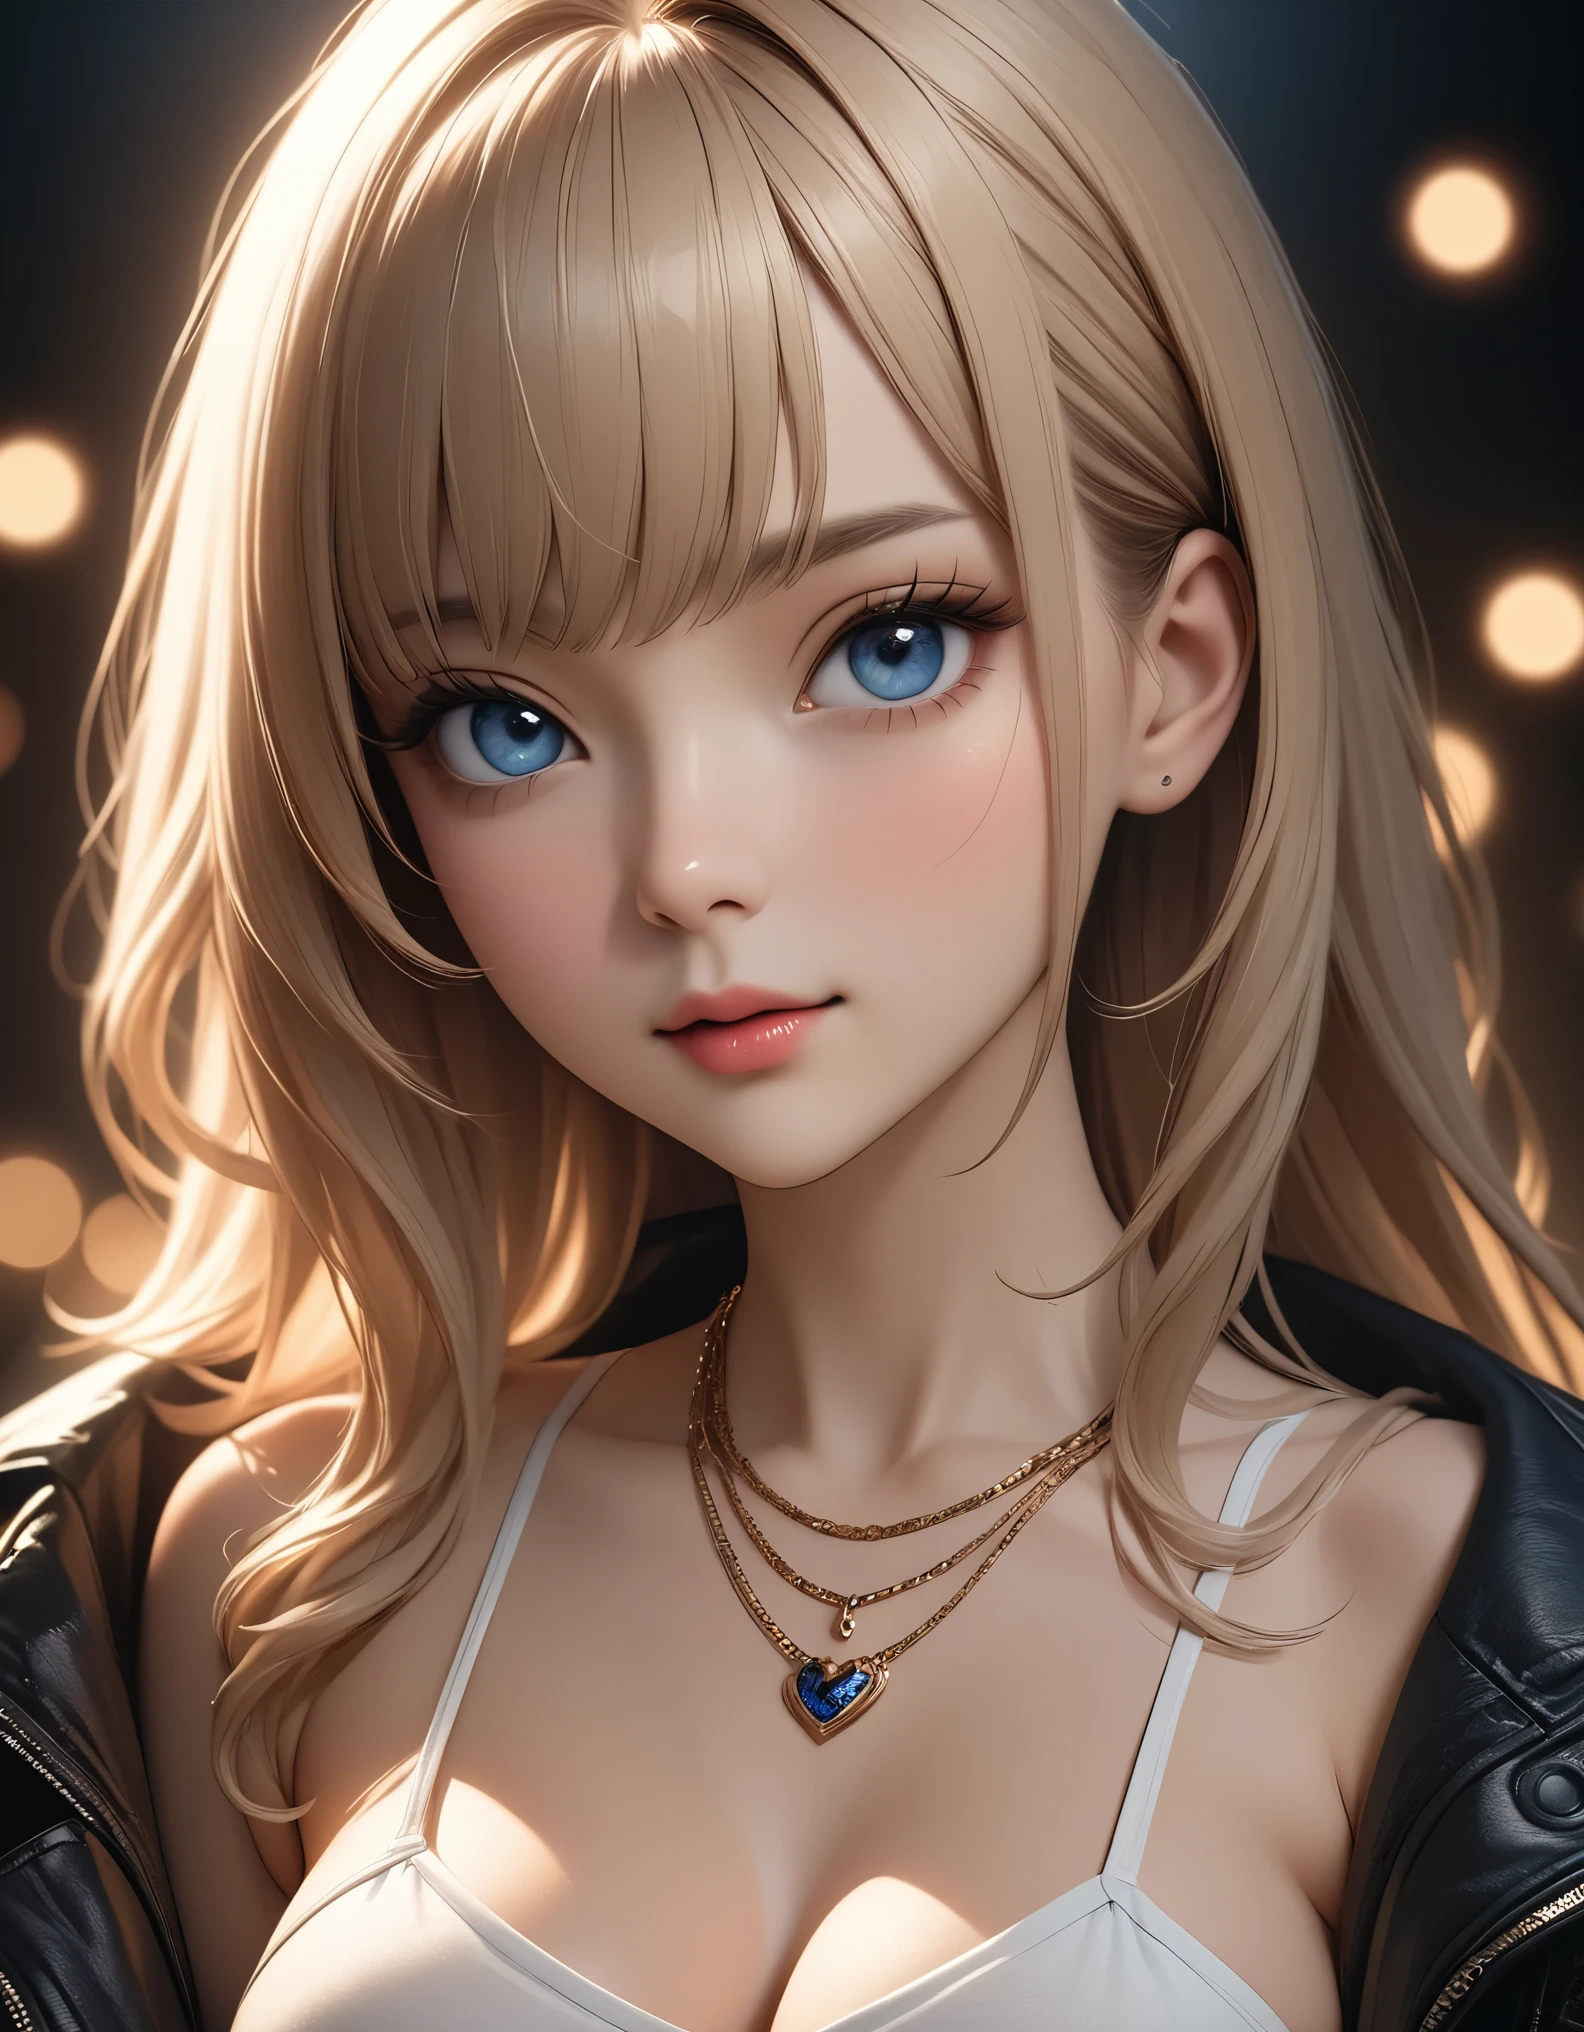 best quality, masterpiece, high resolution, A girl, blonde, Blue eyes, fashion clothing, necklace, jewelry, Pretty Face, Perfect breasts, more than_Body, Tyndall effect, lifelike, Dark Studio, Side lighting, Two-color lighting, (HD Skin:1.2), 8k Ultra HD, Soft Light, high quality, Volumetric Lighting, frank, photography, high resolution, 8k, Bokeh, short depth of field,,